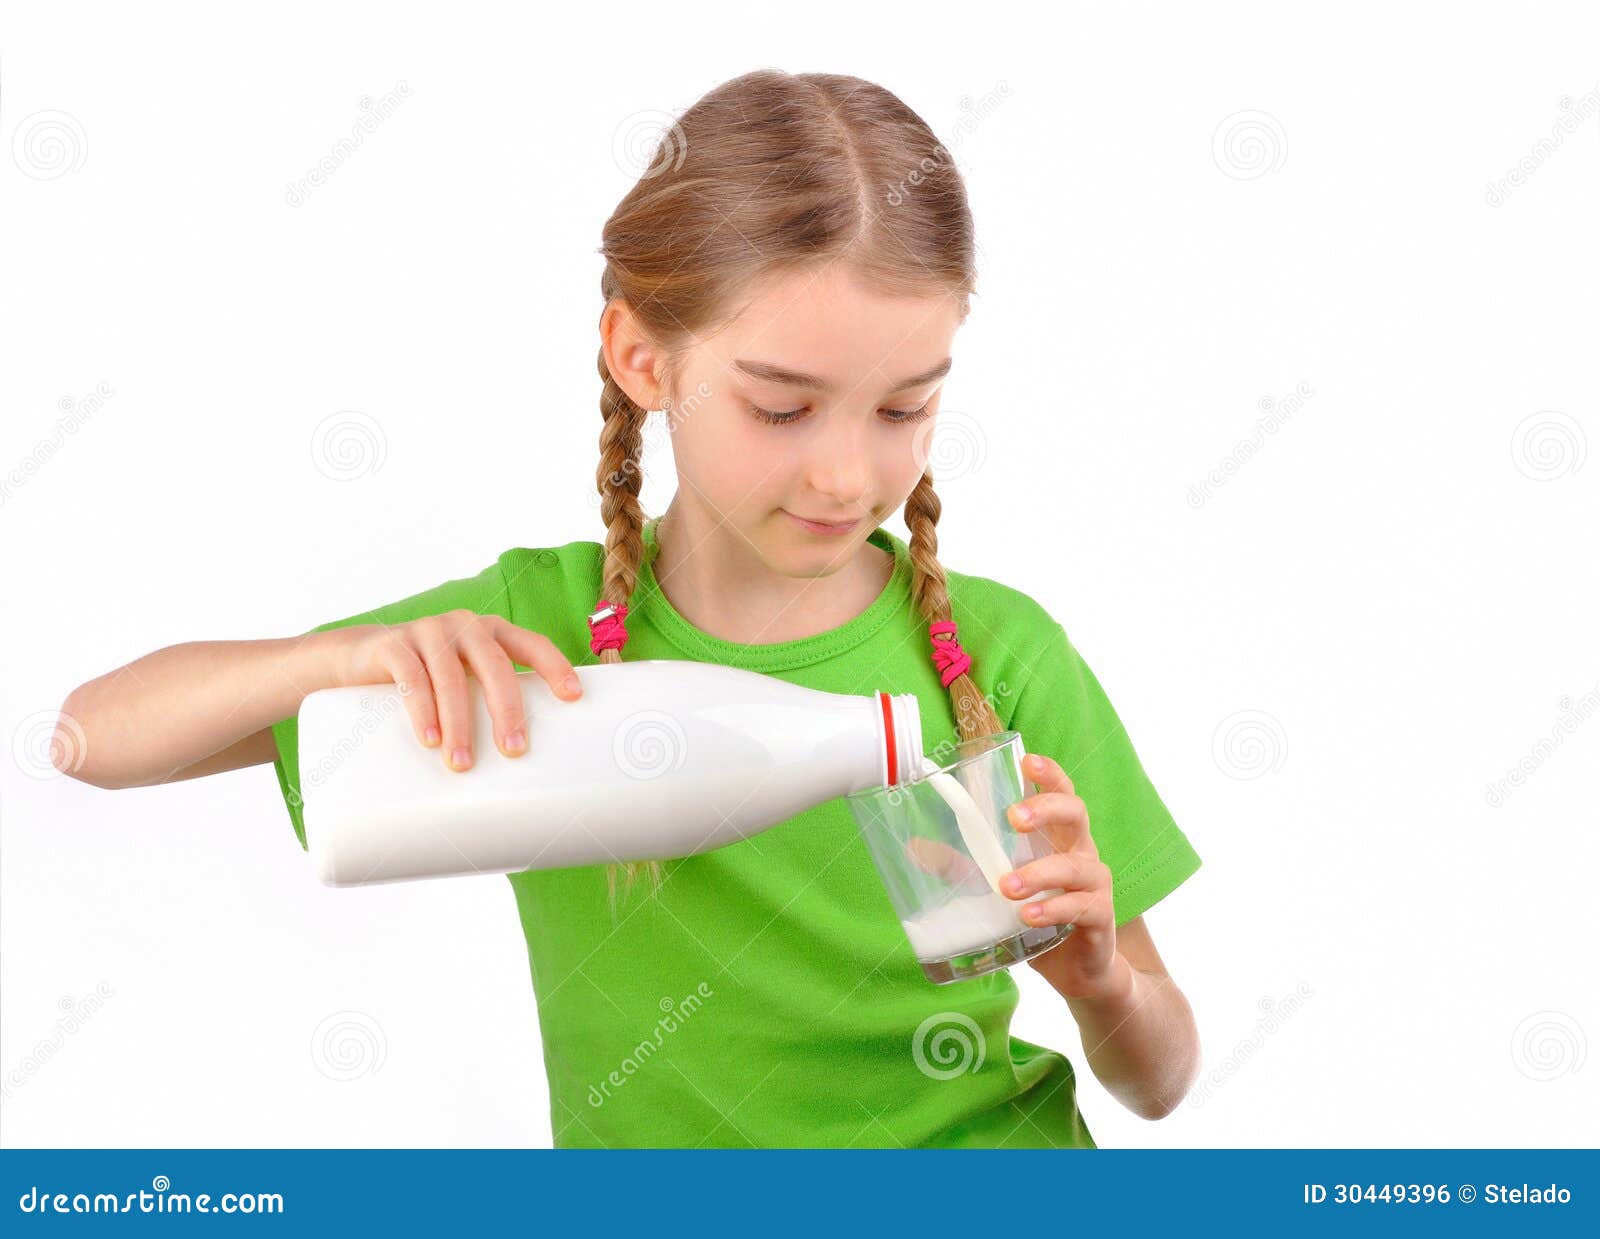 little girl pours milk from a bottle into glass